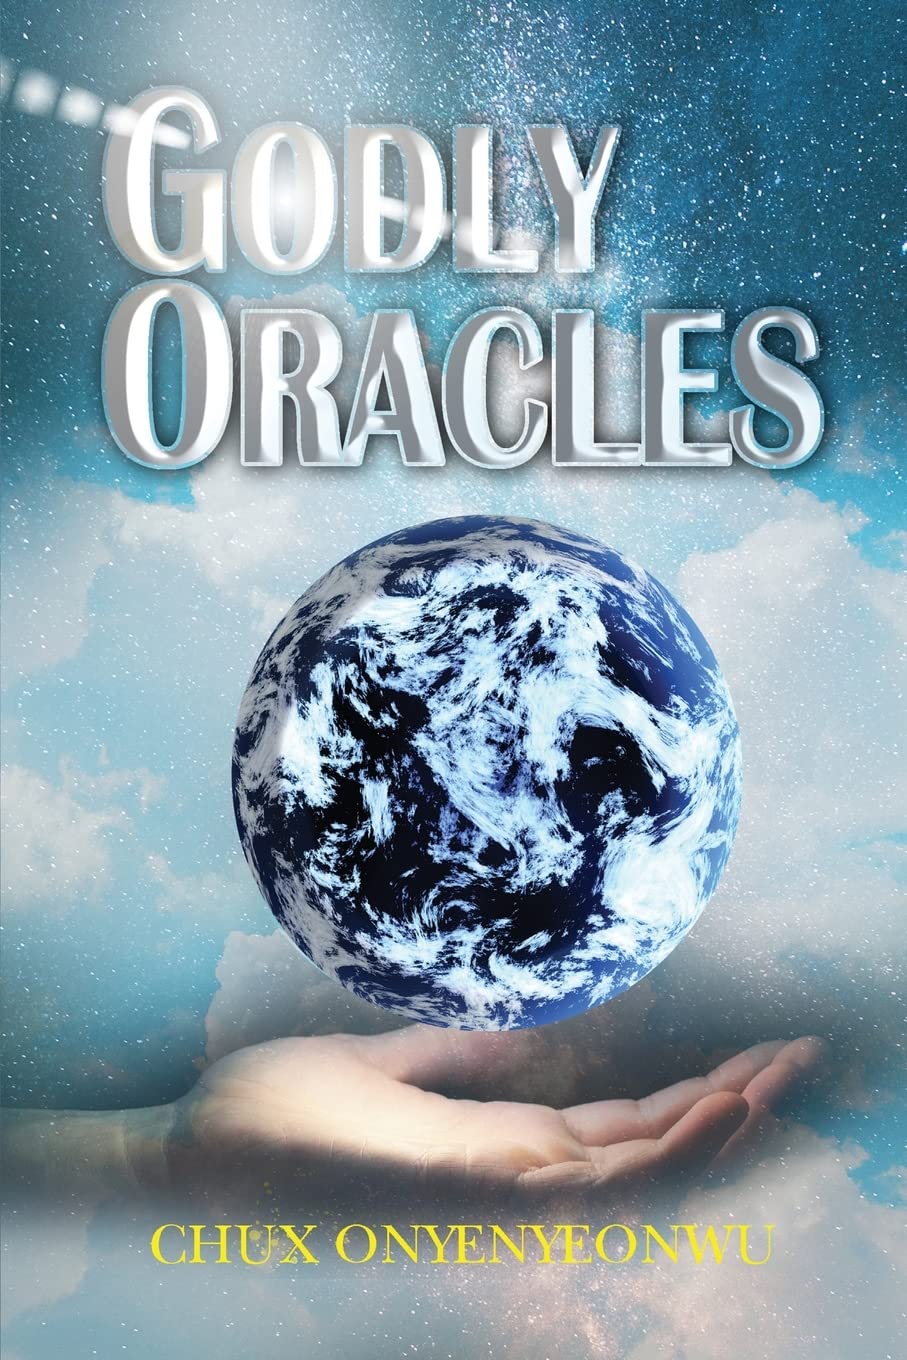 New Historical Fiction Novel "Godly Oracles" from Author's Tranquility Press Reveals the Impact of Oracles on African Family during Transatlantic Slave Trade